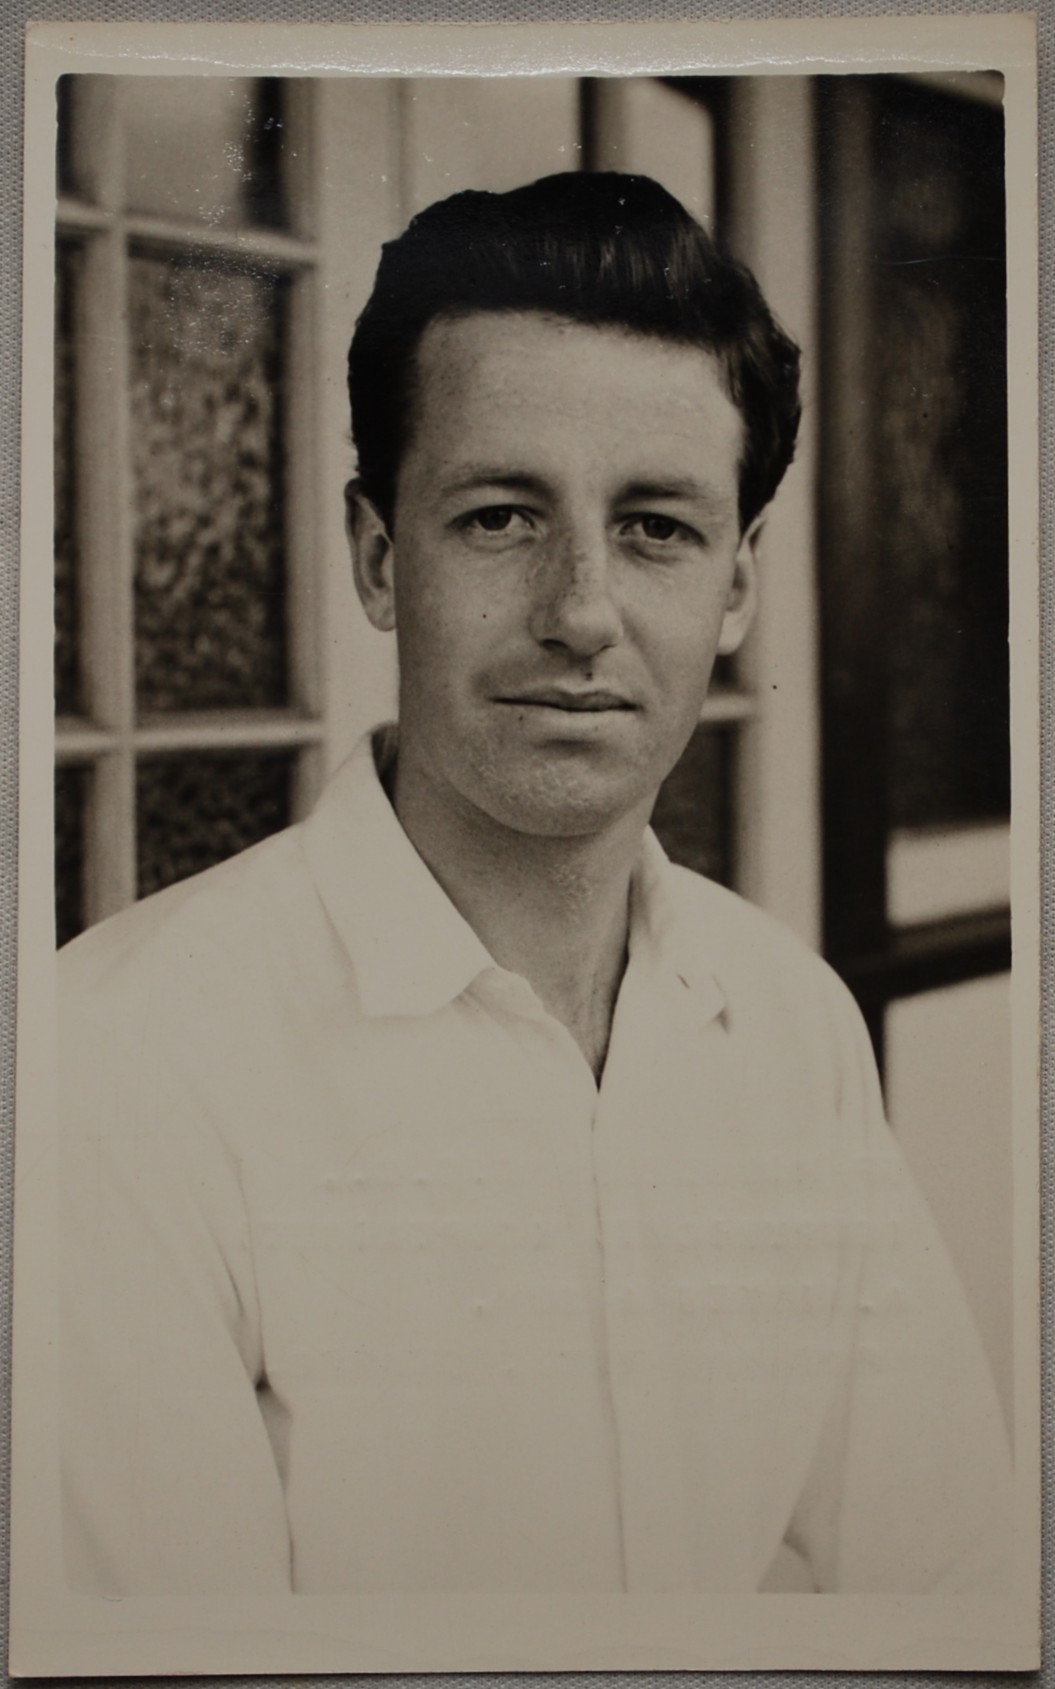 Robert A. Gale. Middlesex 1956-1965. Mono real photograph plain back postcard of Gale, head and